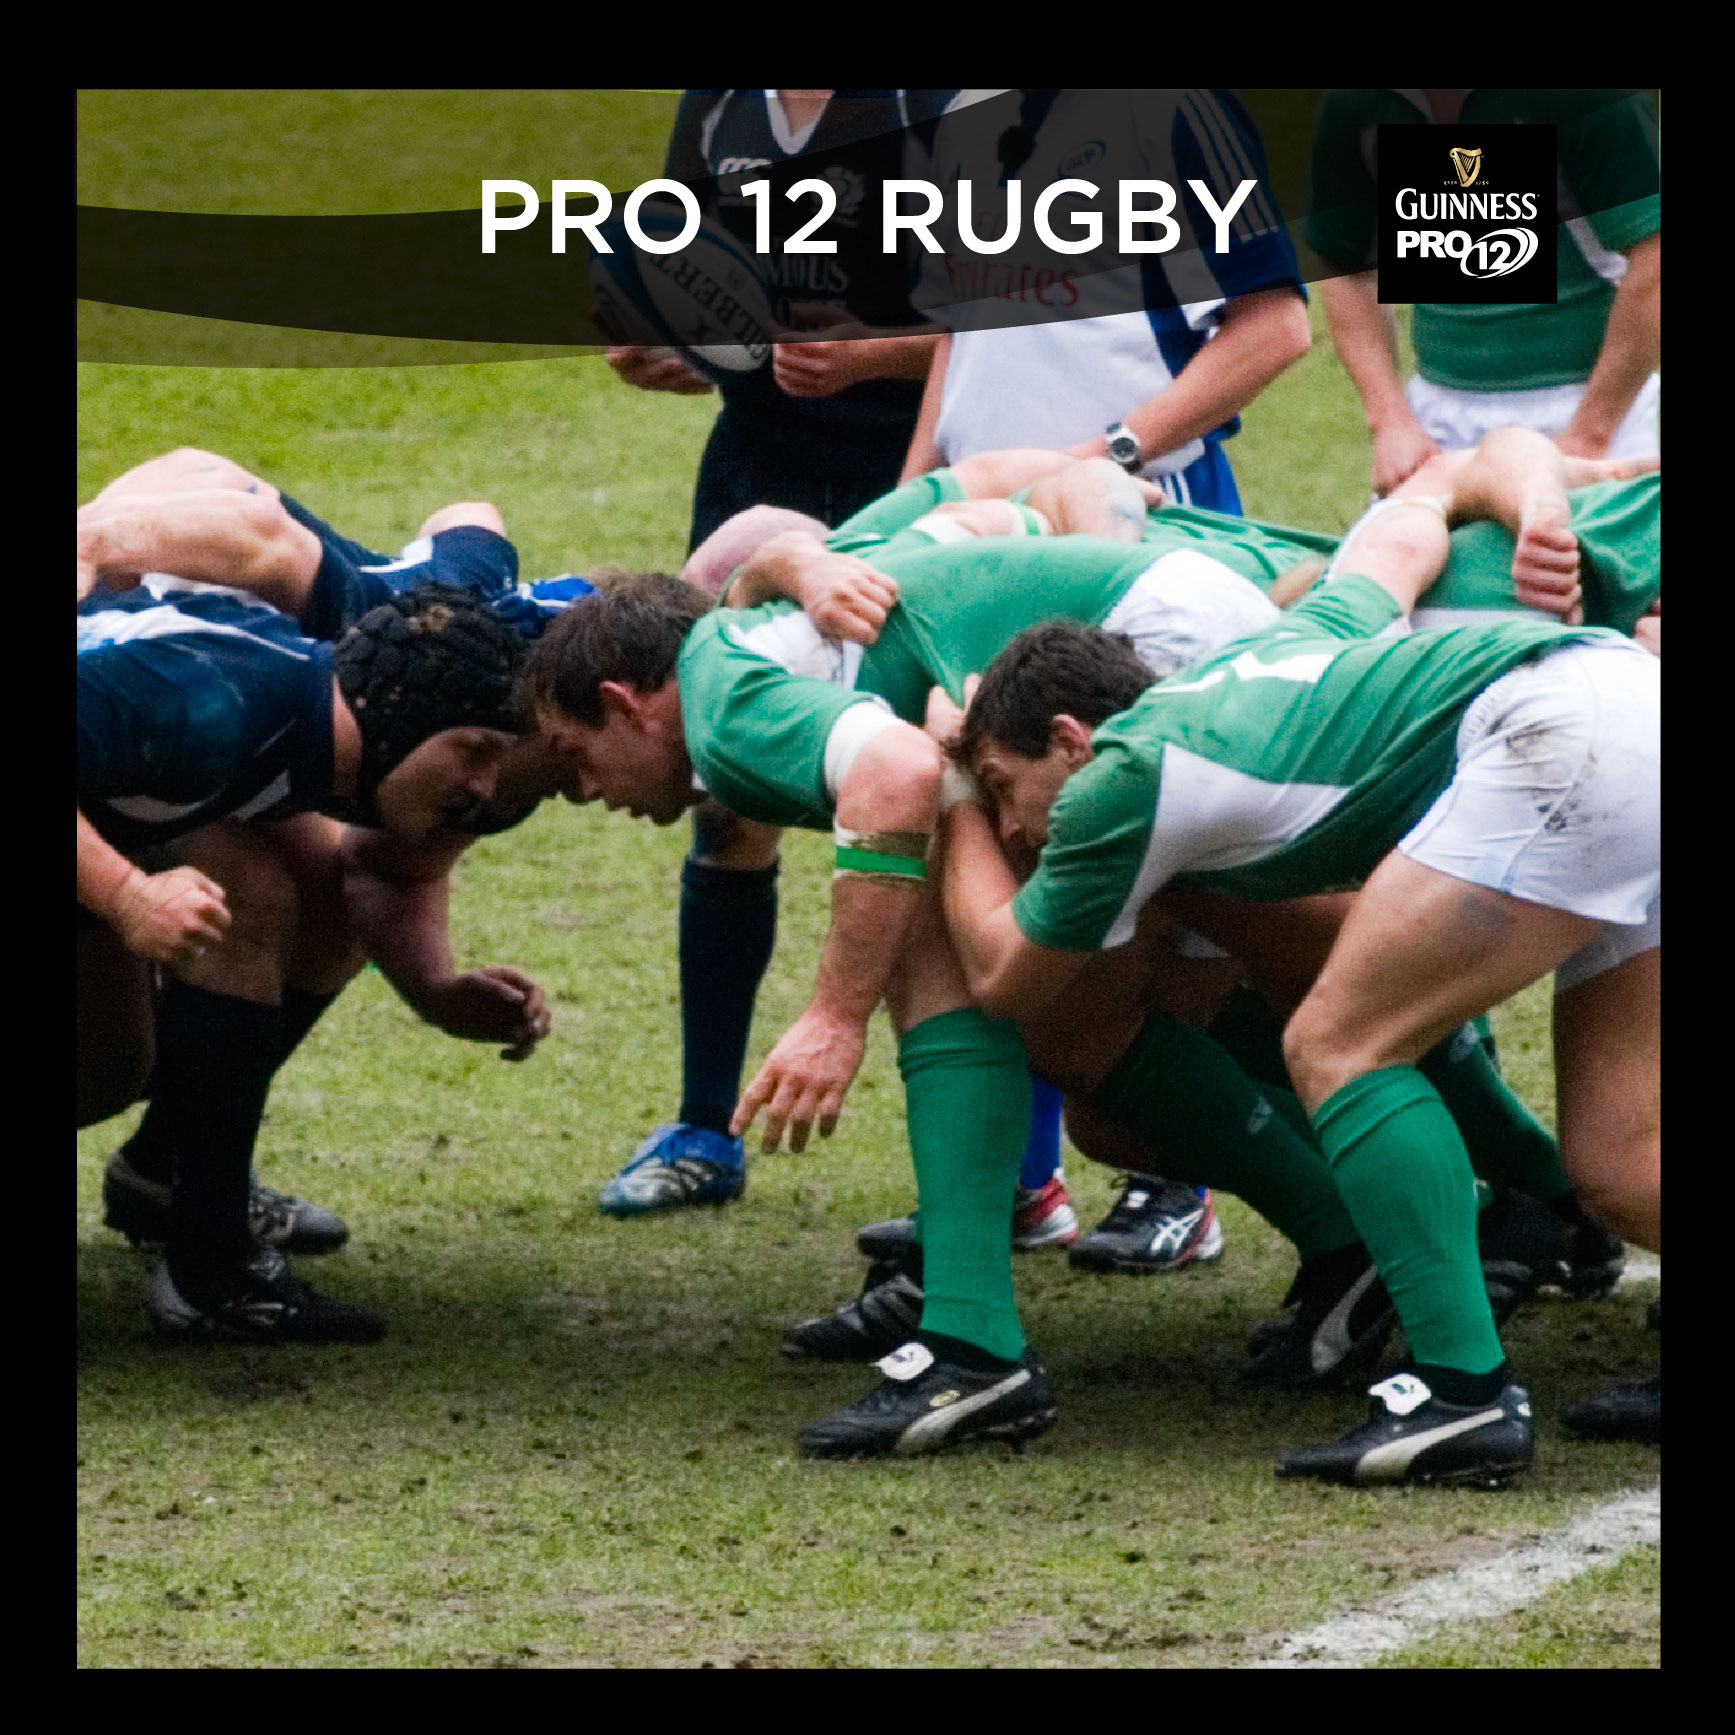 Pro 12 Rugby